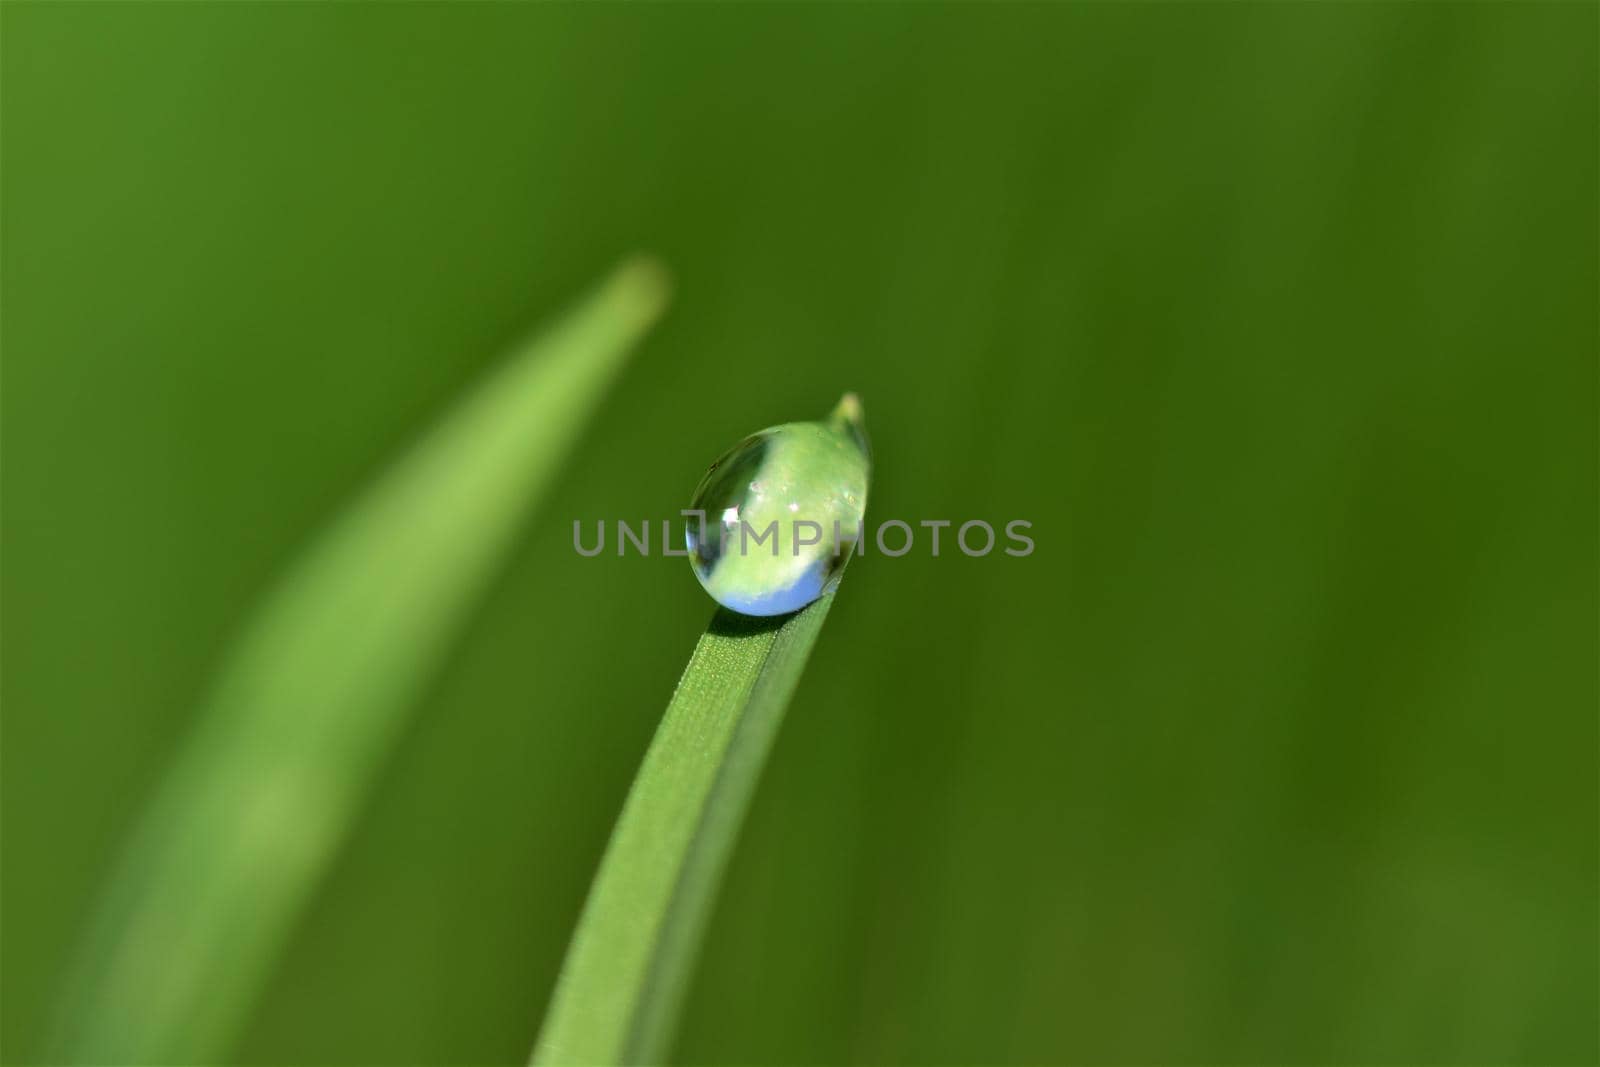 Dew drop on blade of grass against a green blurry background